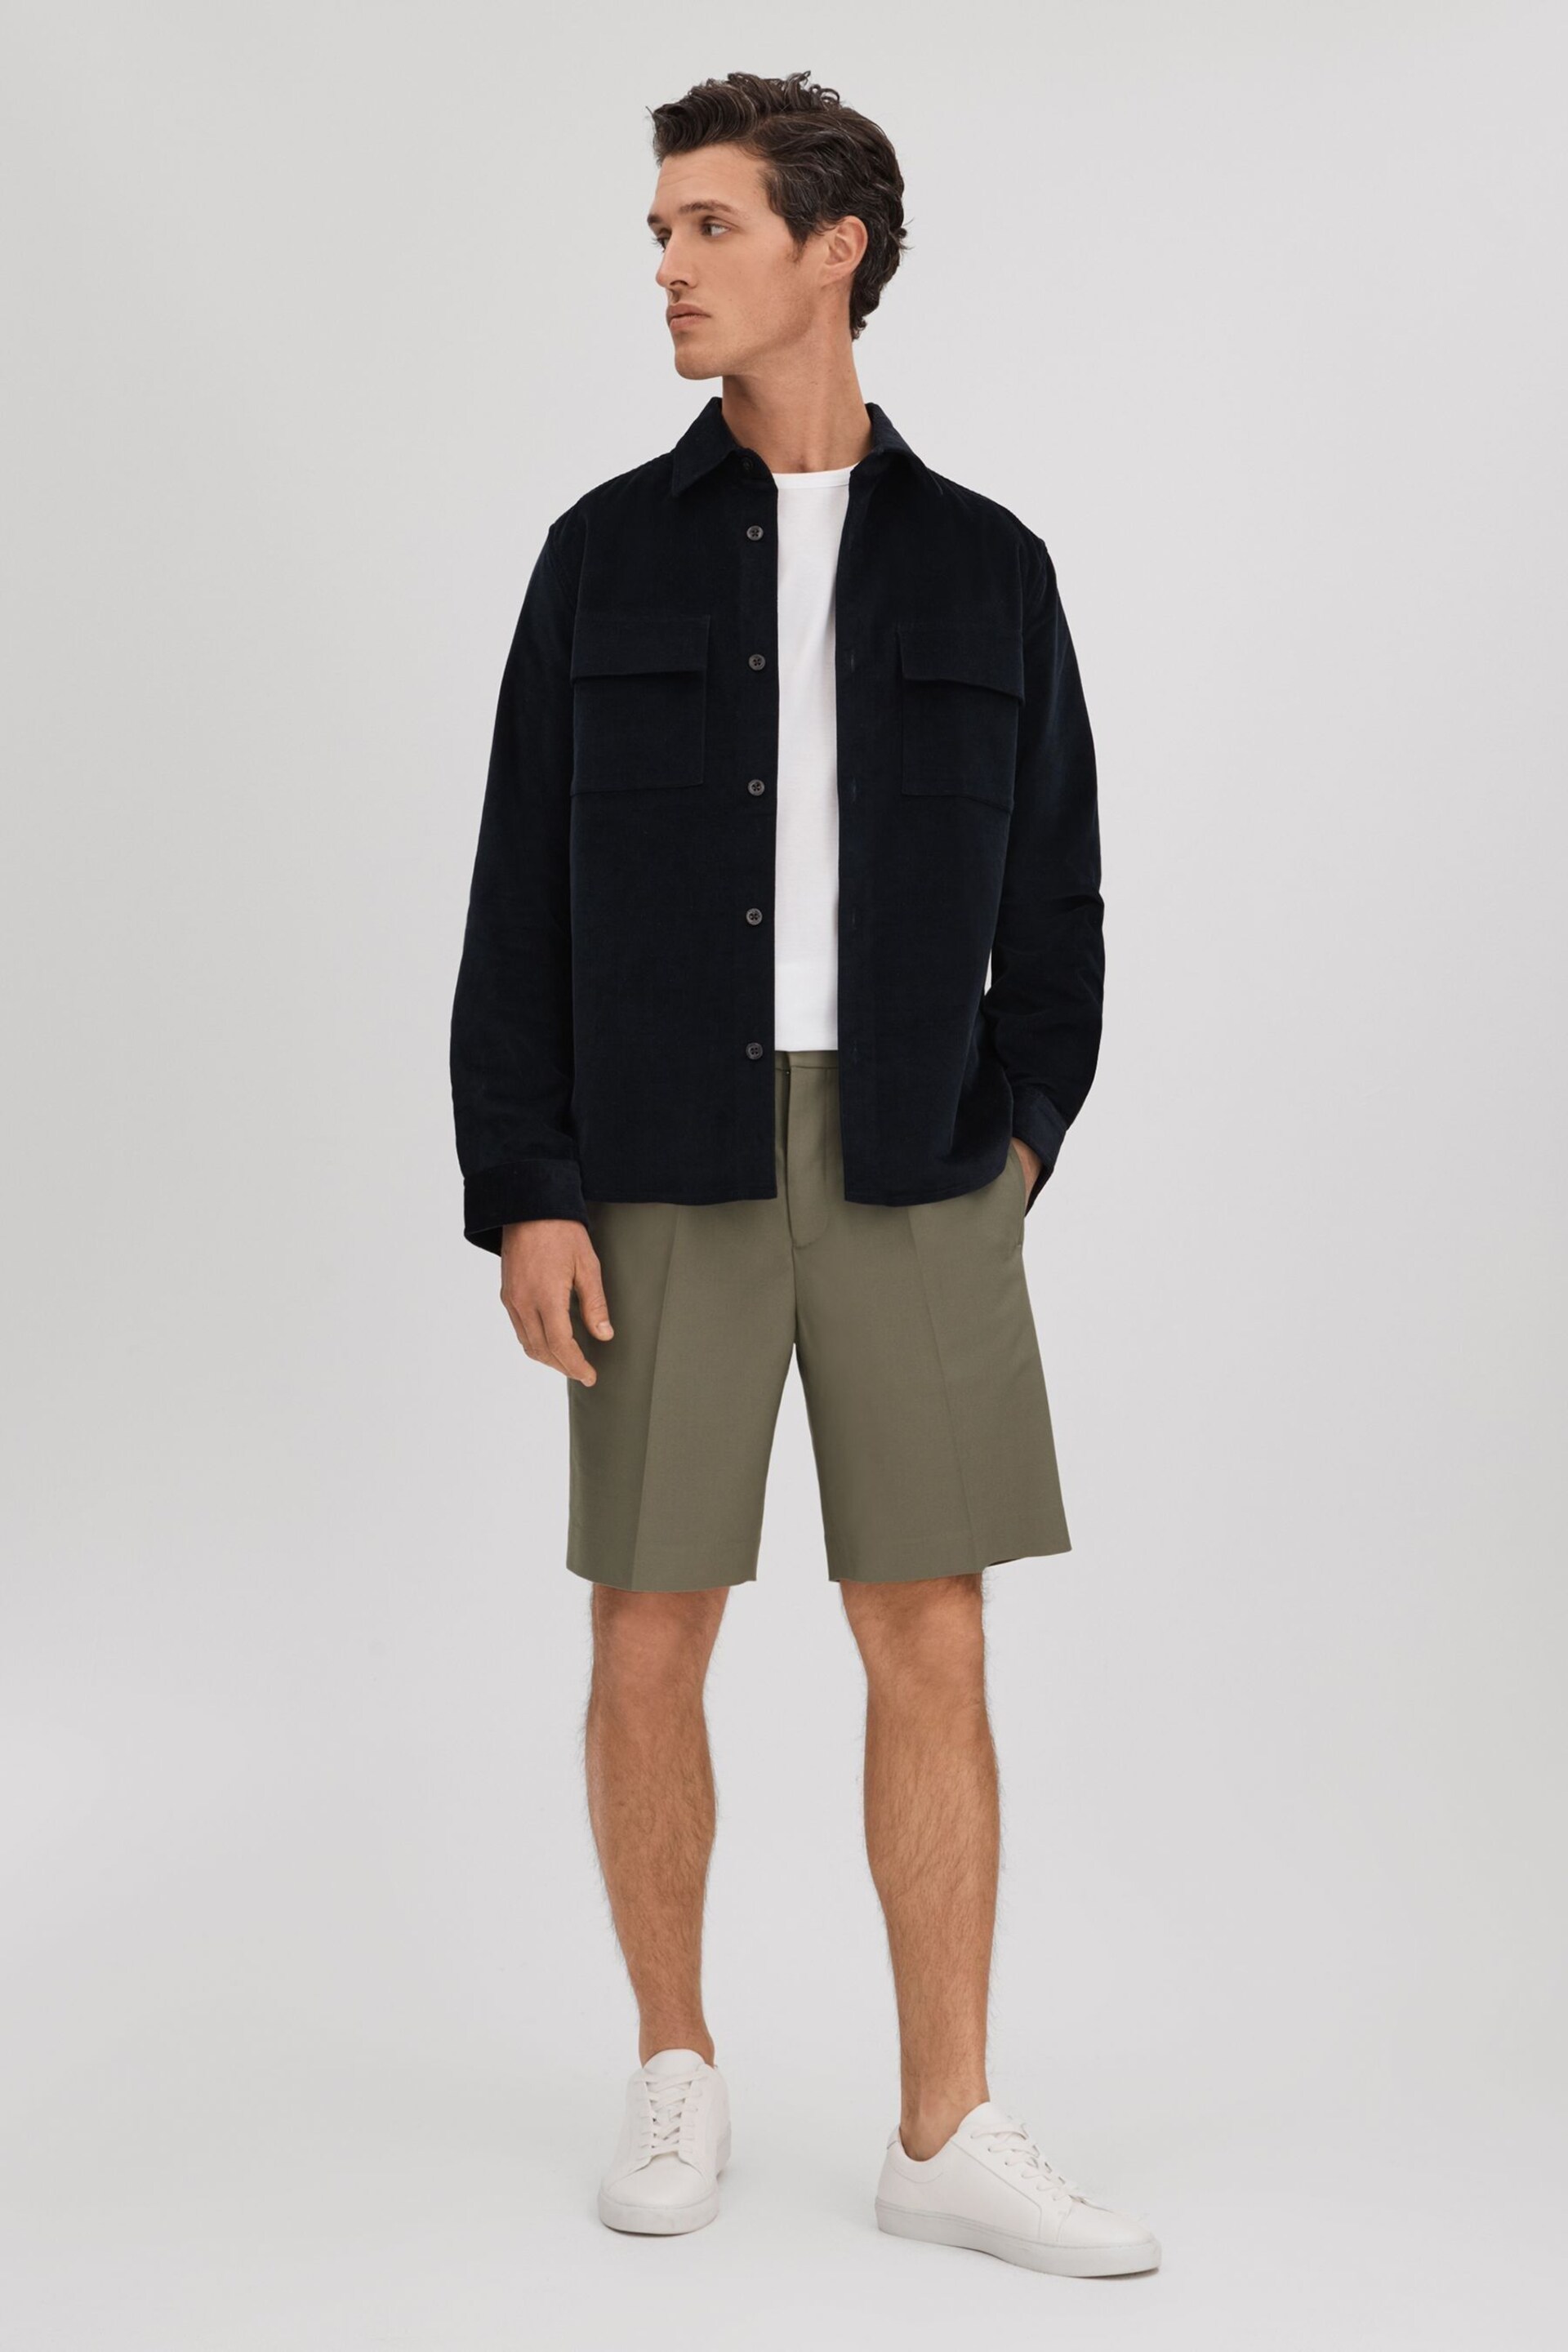 Reiss Sage Sussex Relaxed Drawstring Shorts - Image 3 of 6